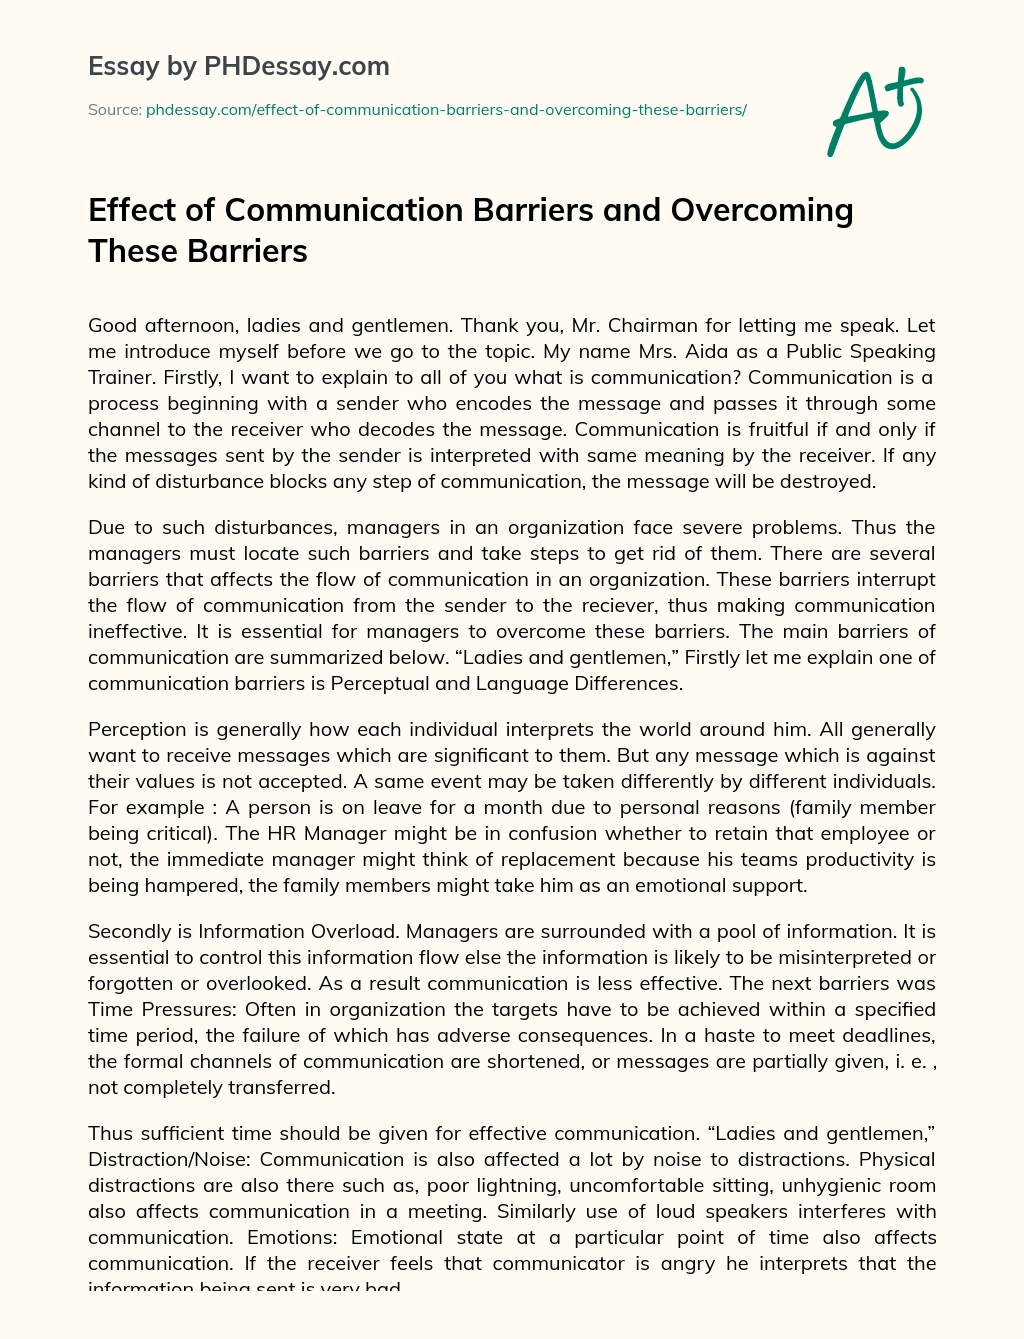 Effect of Communication Barriers and Overcoming These Barriers essay